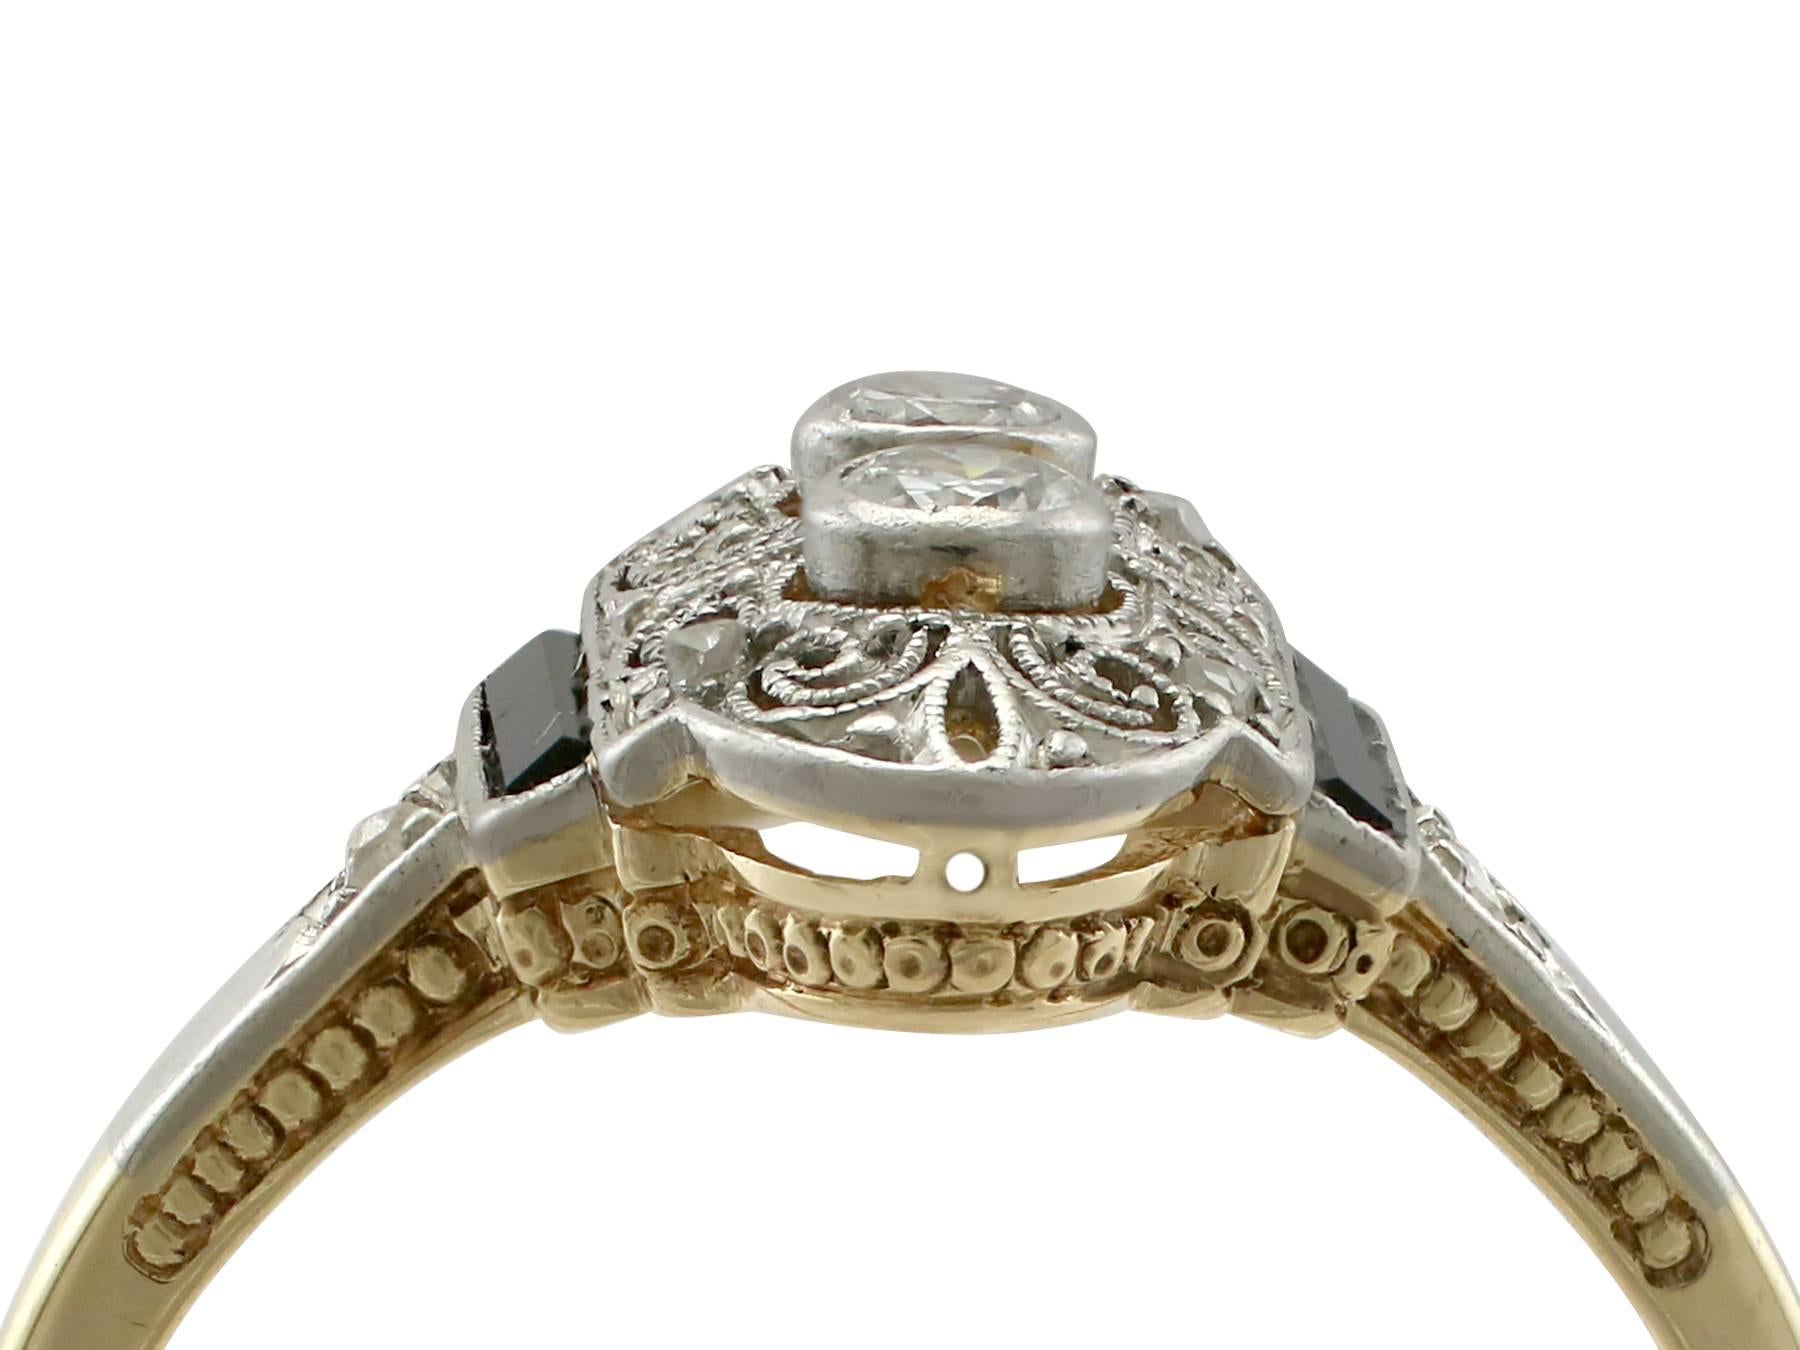 An impressive 0.13 carat diamond and black onyx, 14 karat yellow gold and 14 karat white gold set cocktail ring; part of our diverse antique jewelry and estate jewelry collections

This fine and impressive antique diamond and onyx ring has been